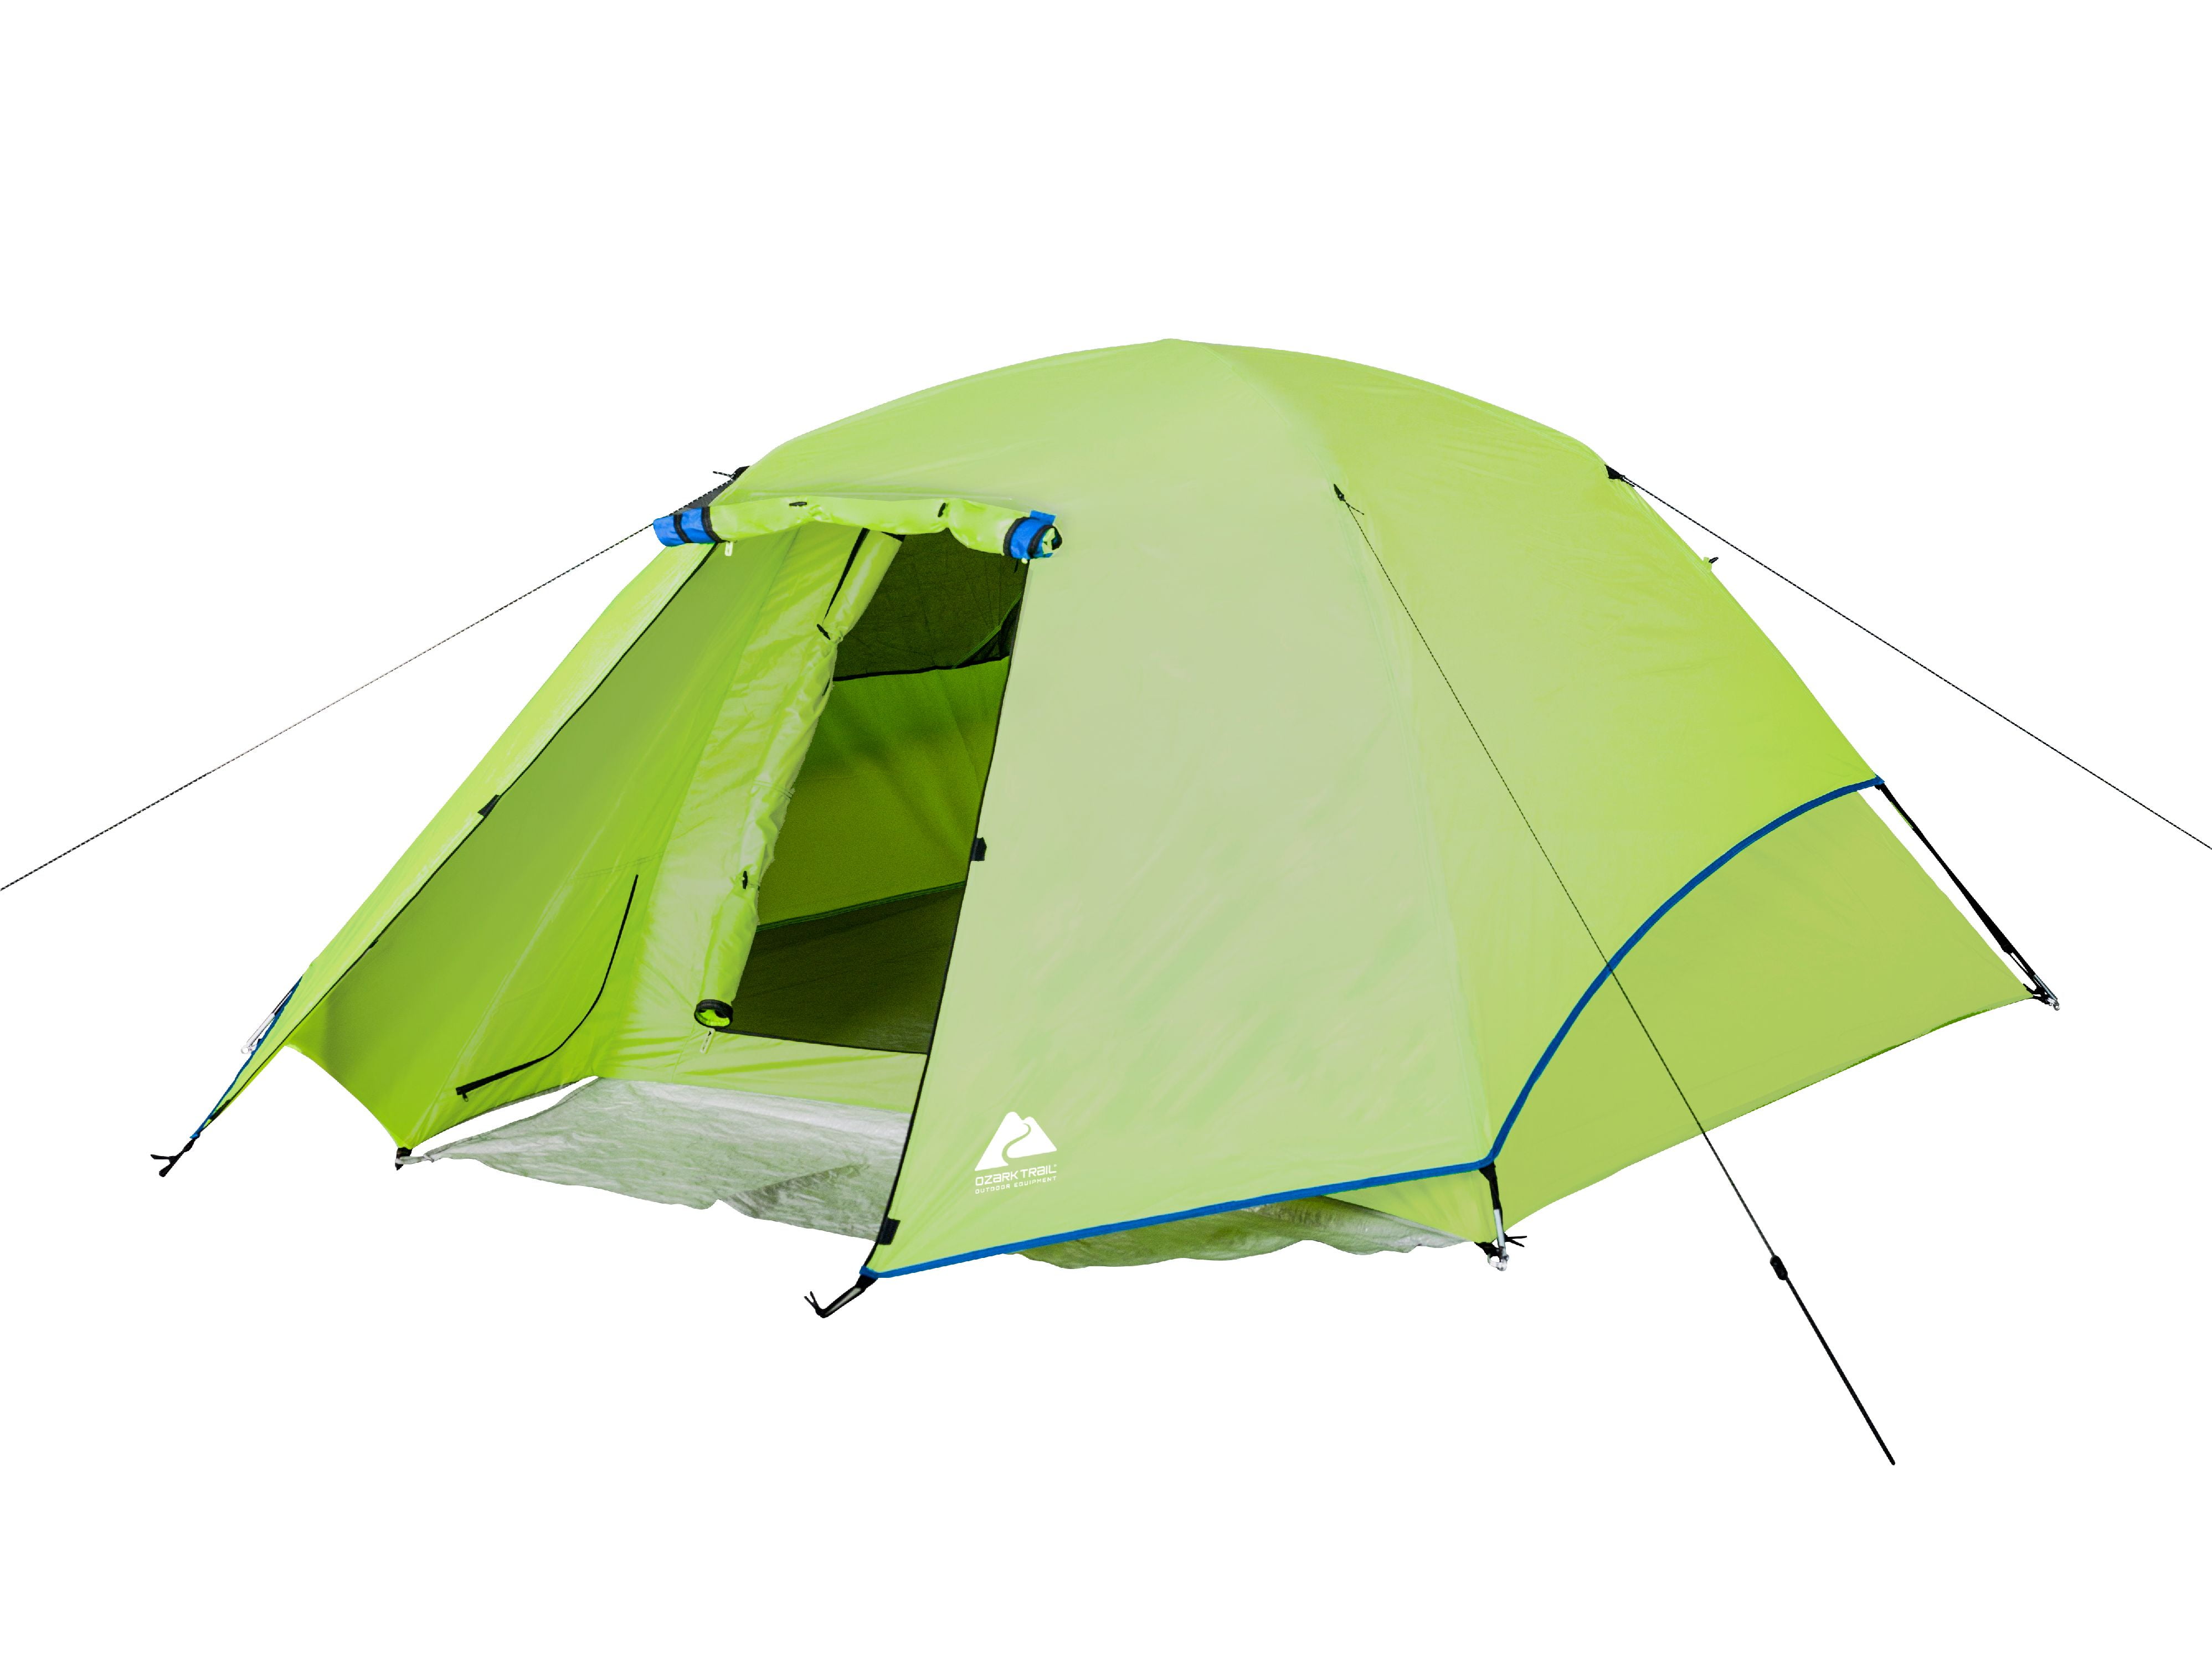 Ozark Trail 4 Person Outdoor Camping Dome Tent NEW FREESHIP 